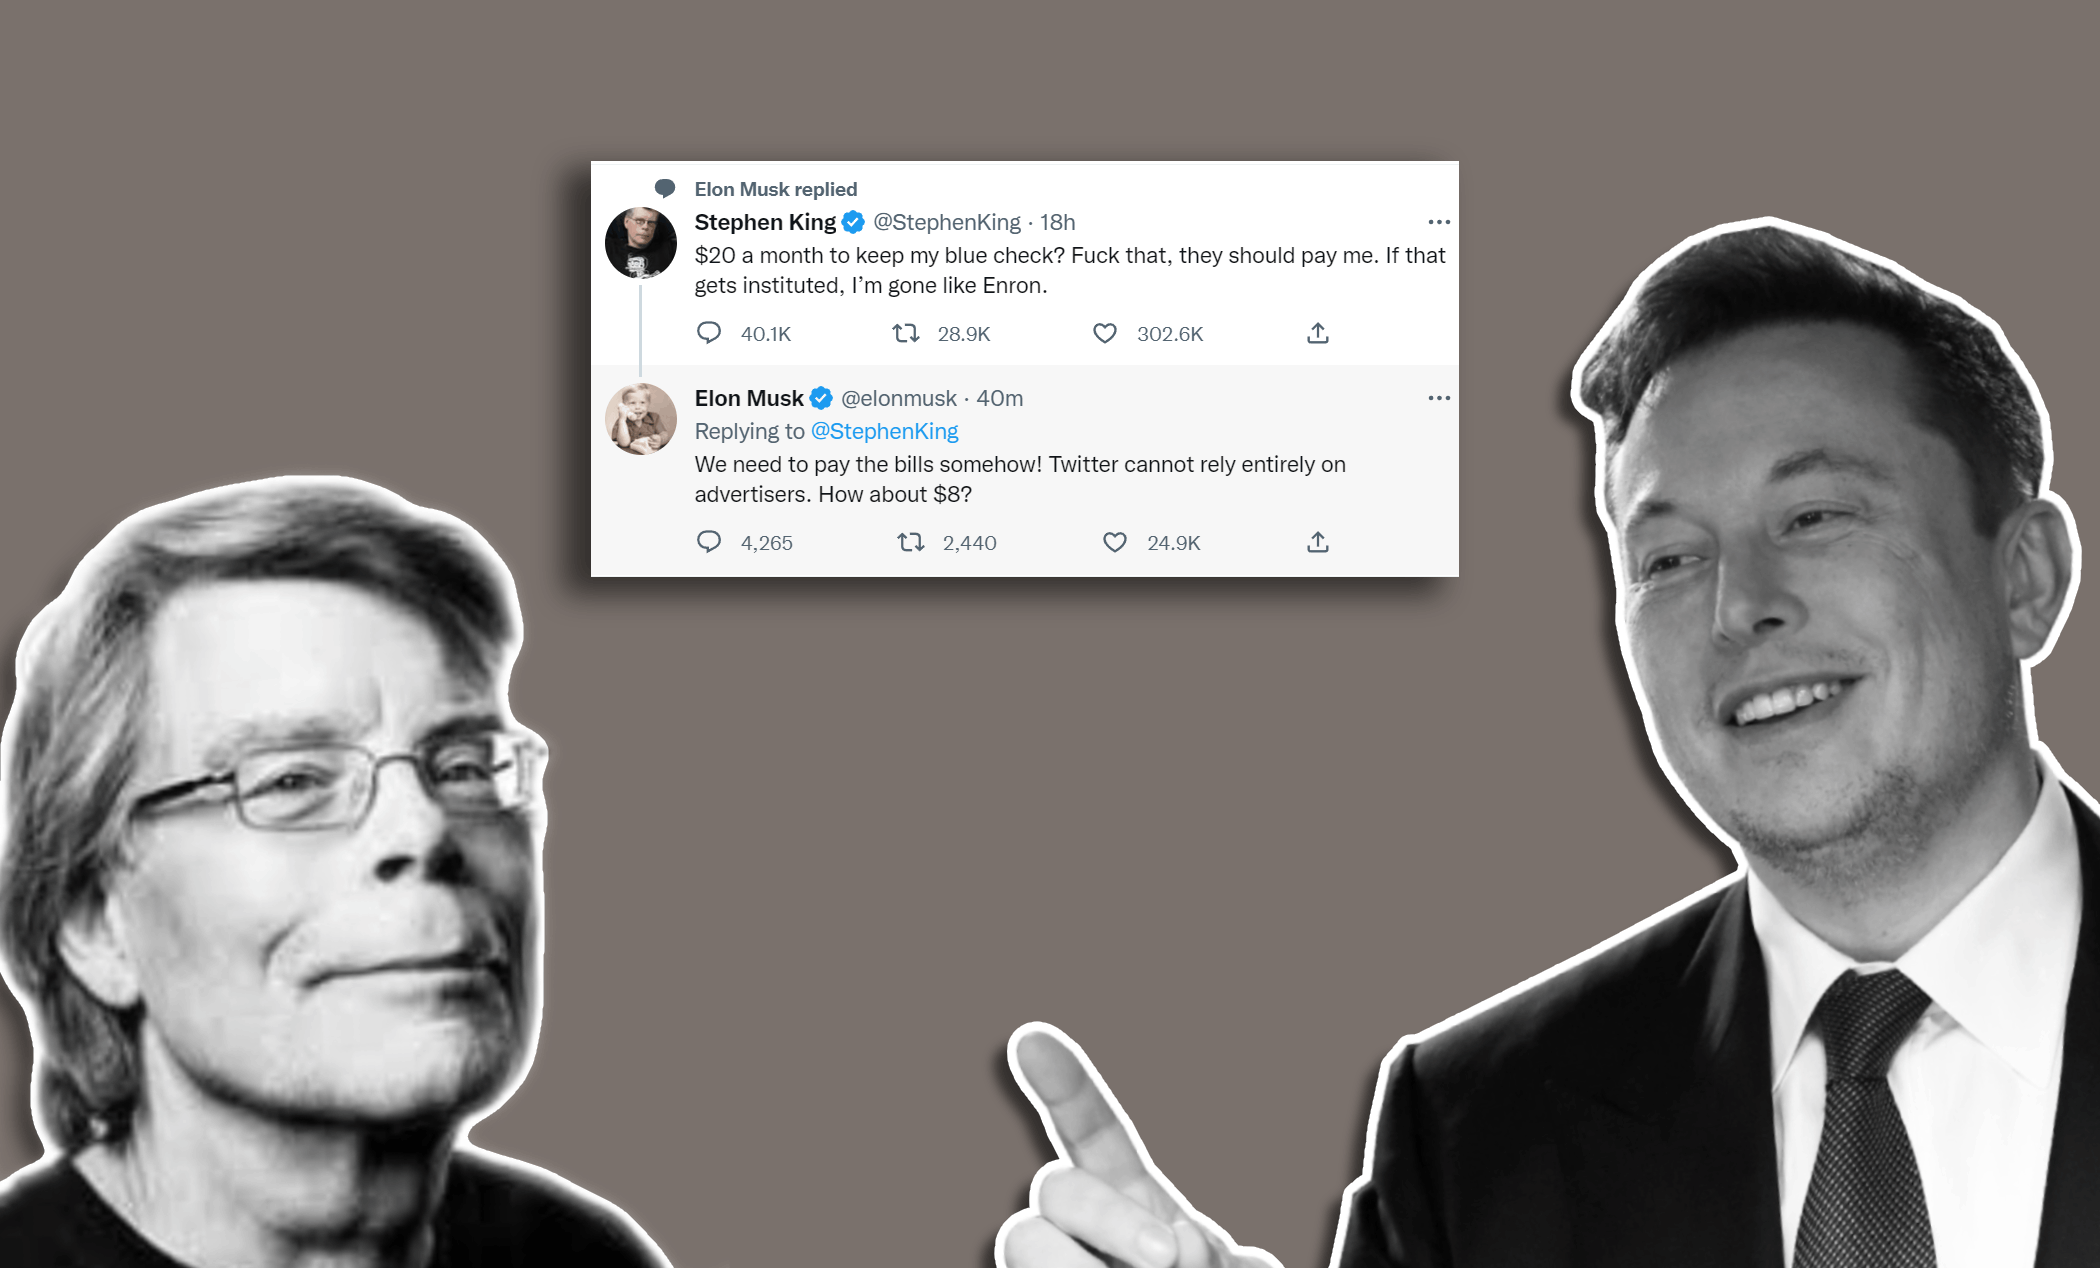 Stephen King doesn't want to pay $20 for his blue check; Musk mulling $8